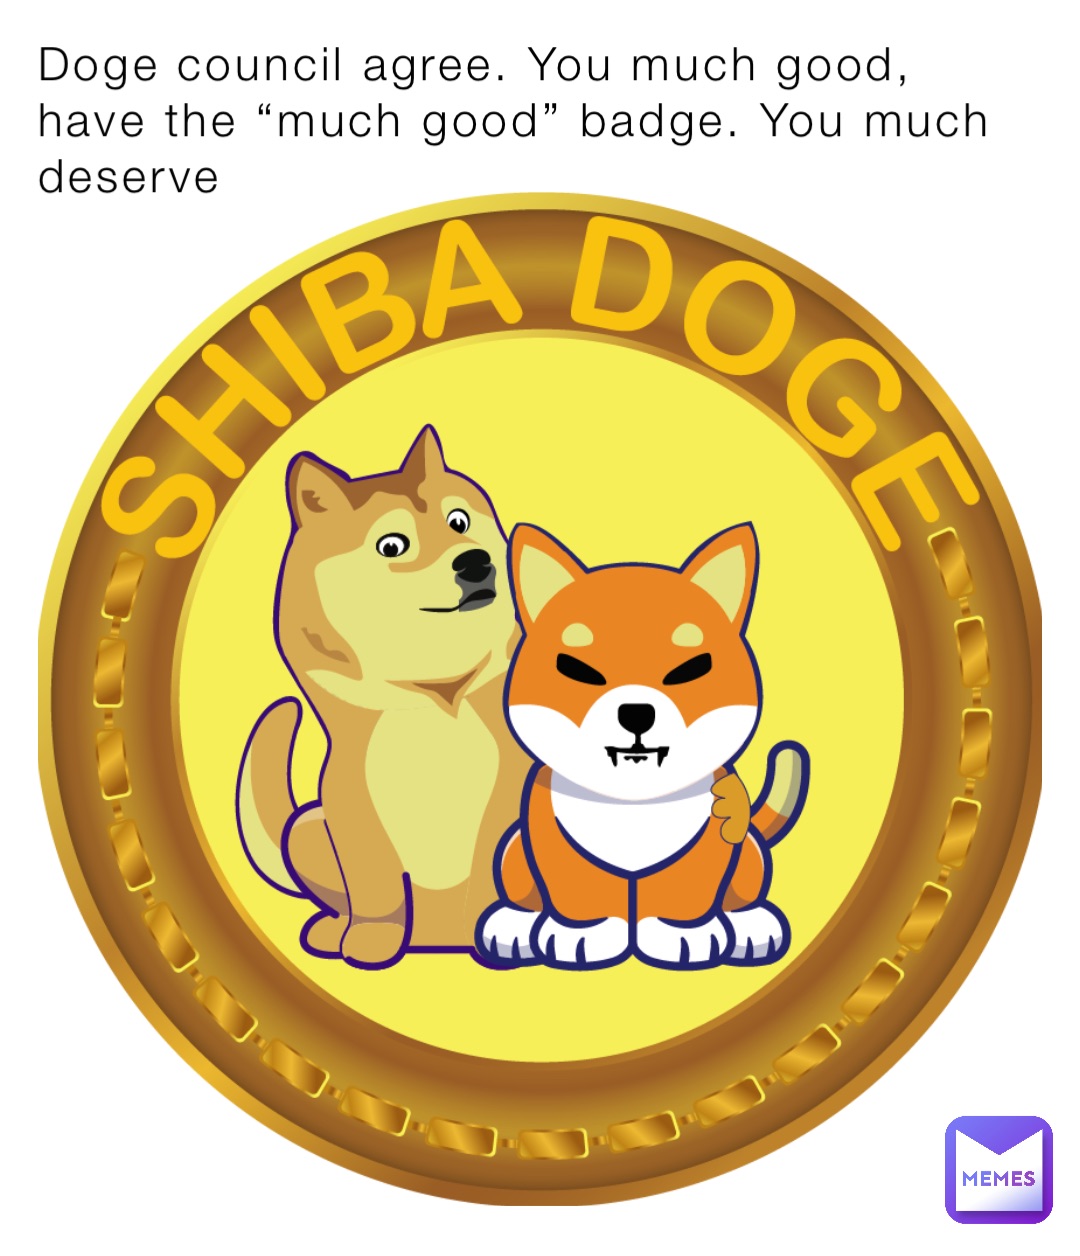 Doge council agree. You much good, have the “much good” badge. You much deserve